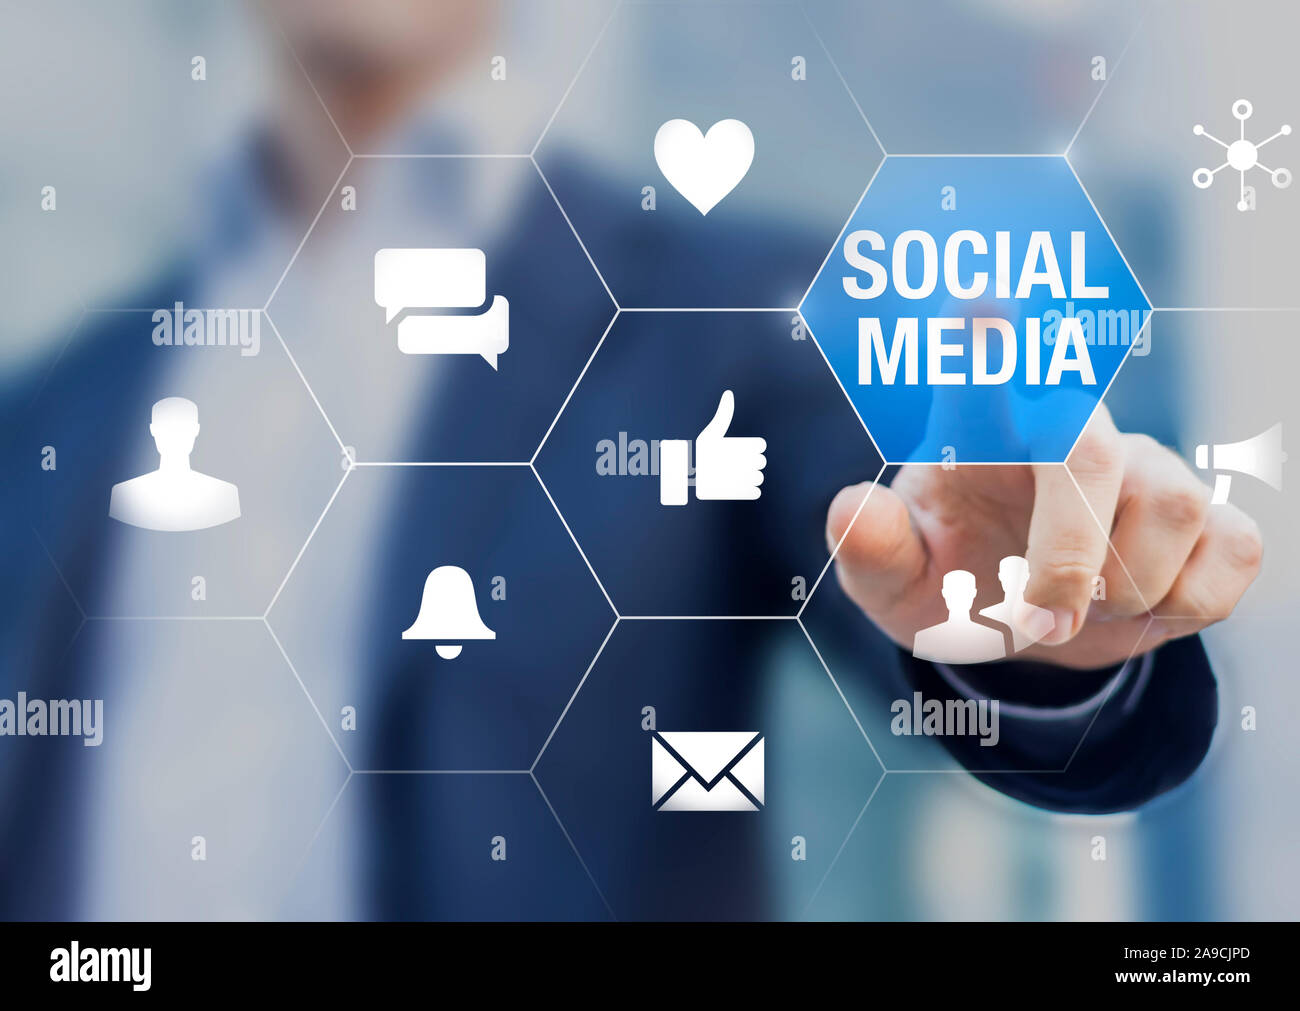 Social media network community manager touching icons about reputation on internet with likes, love, messages, shares and viral advertisement, online Stock Photo